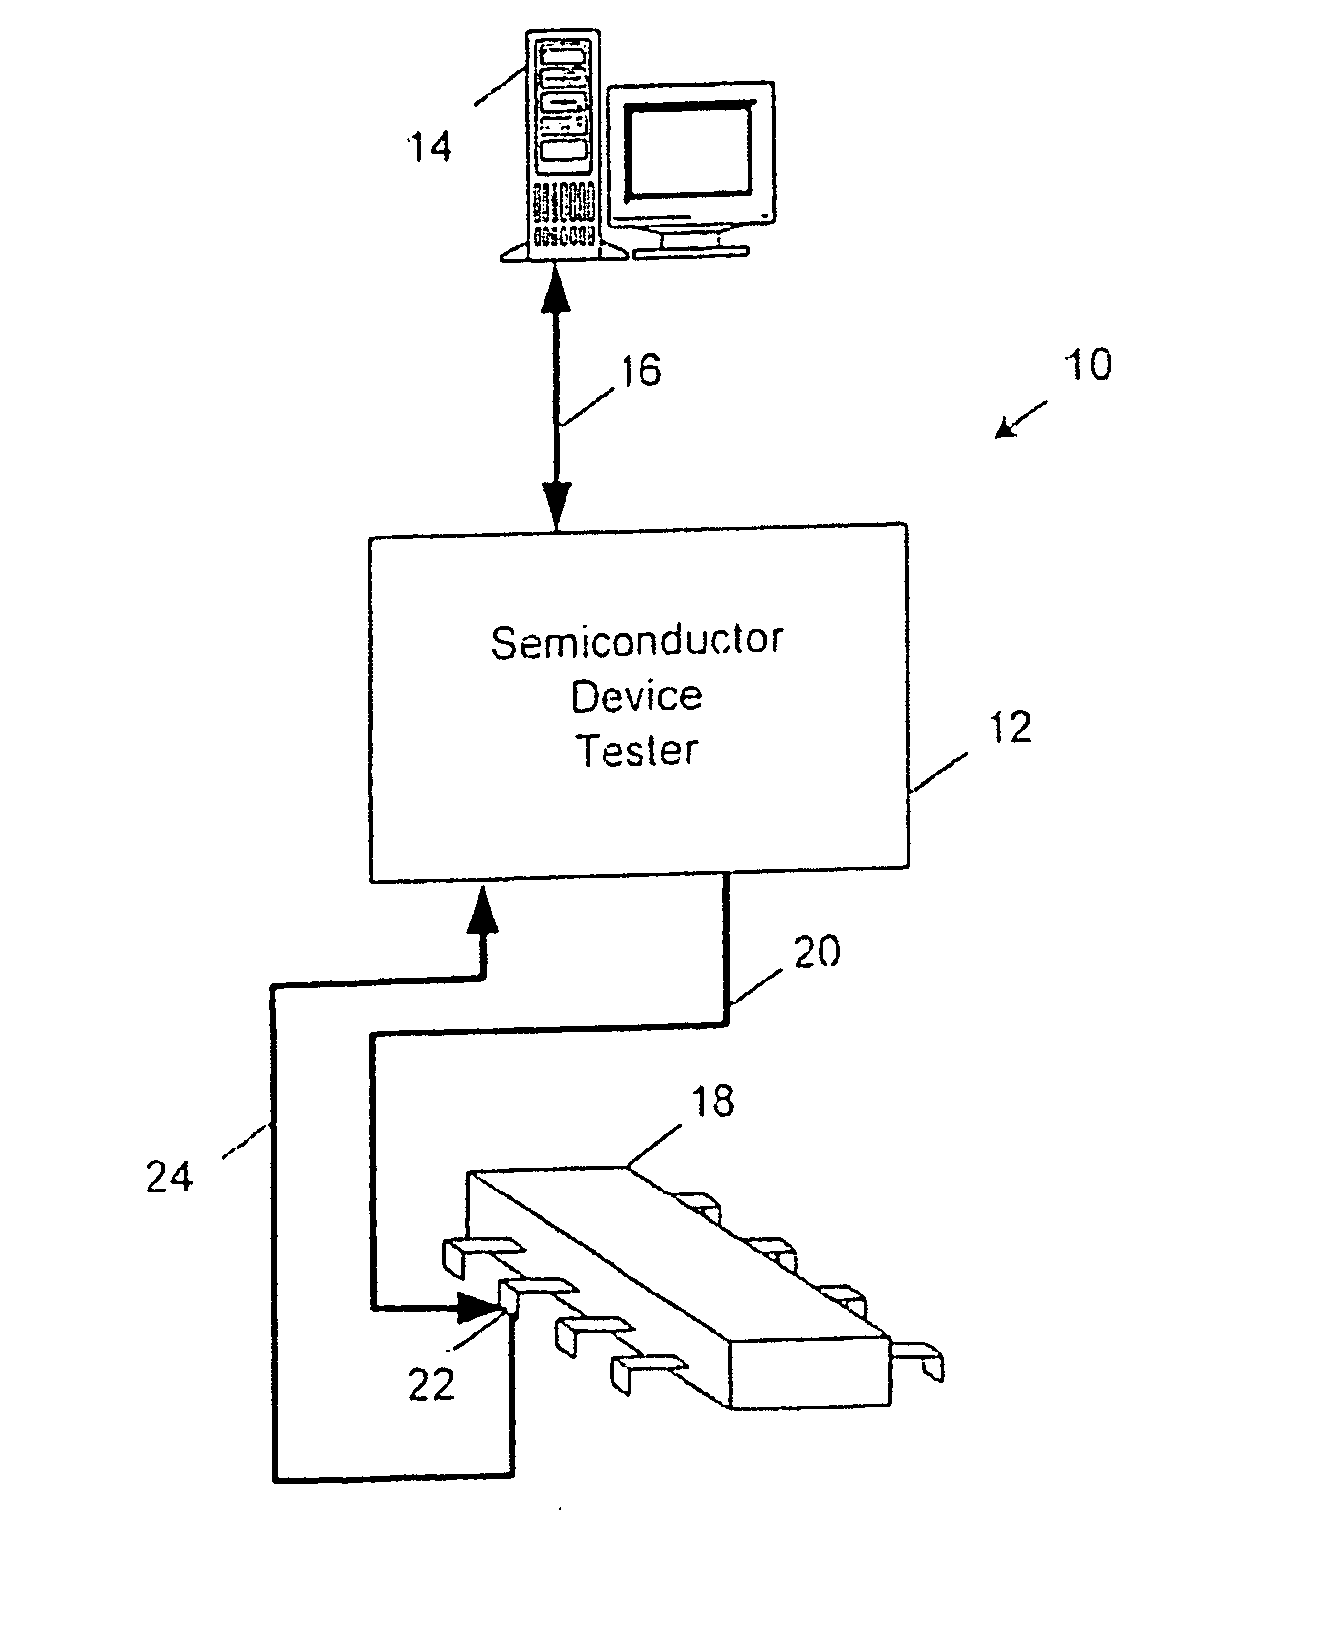 Method and system for monitoring test signals for semiconductor devices